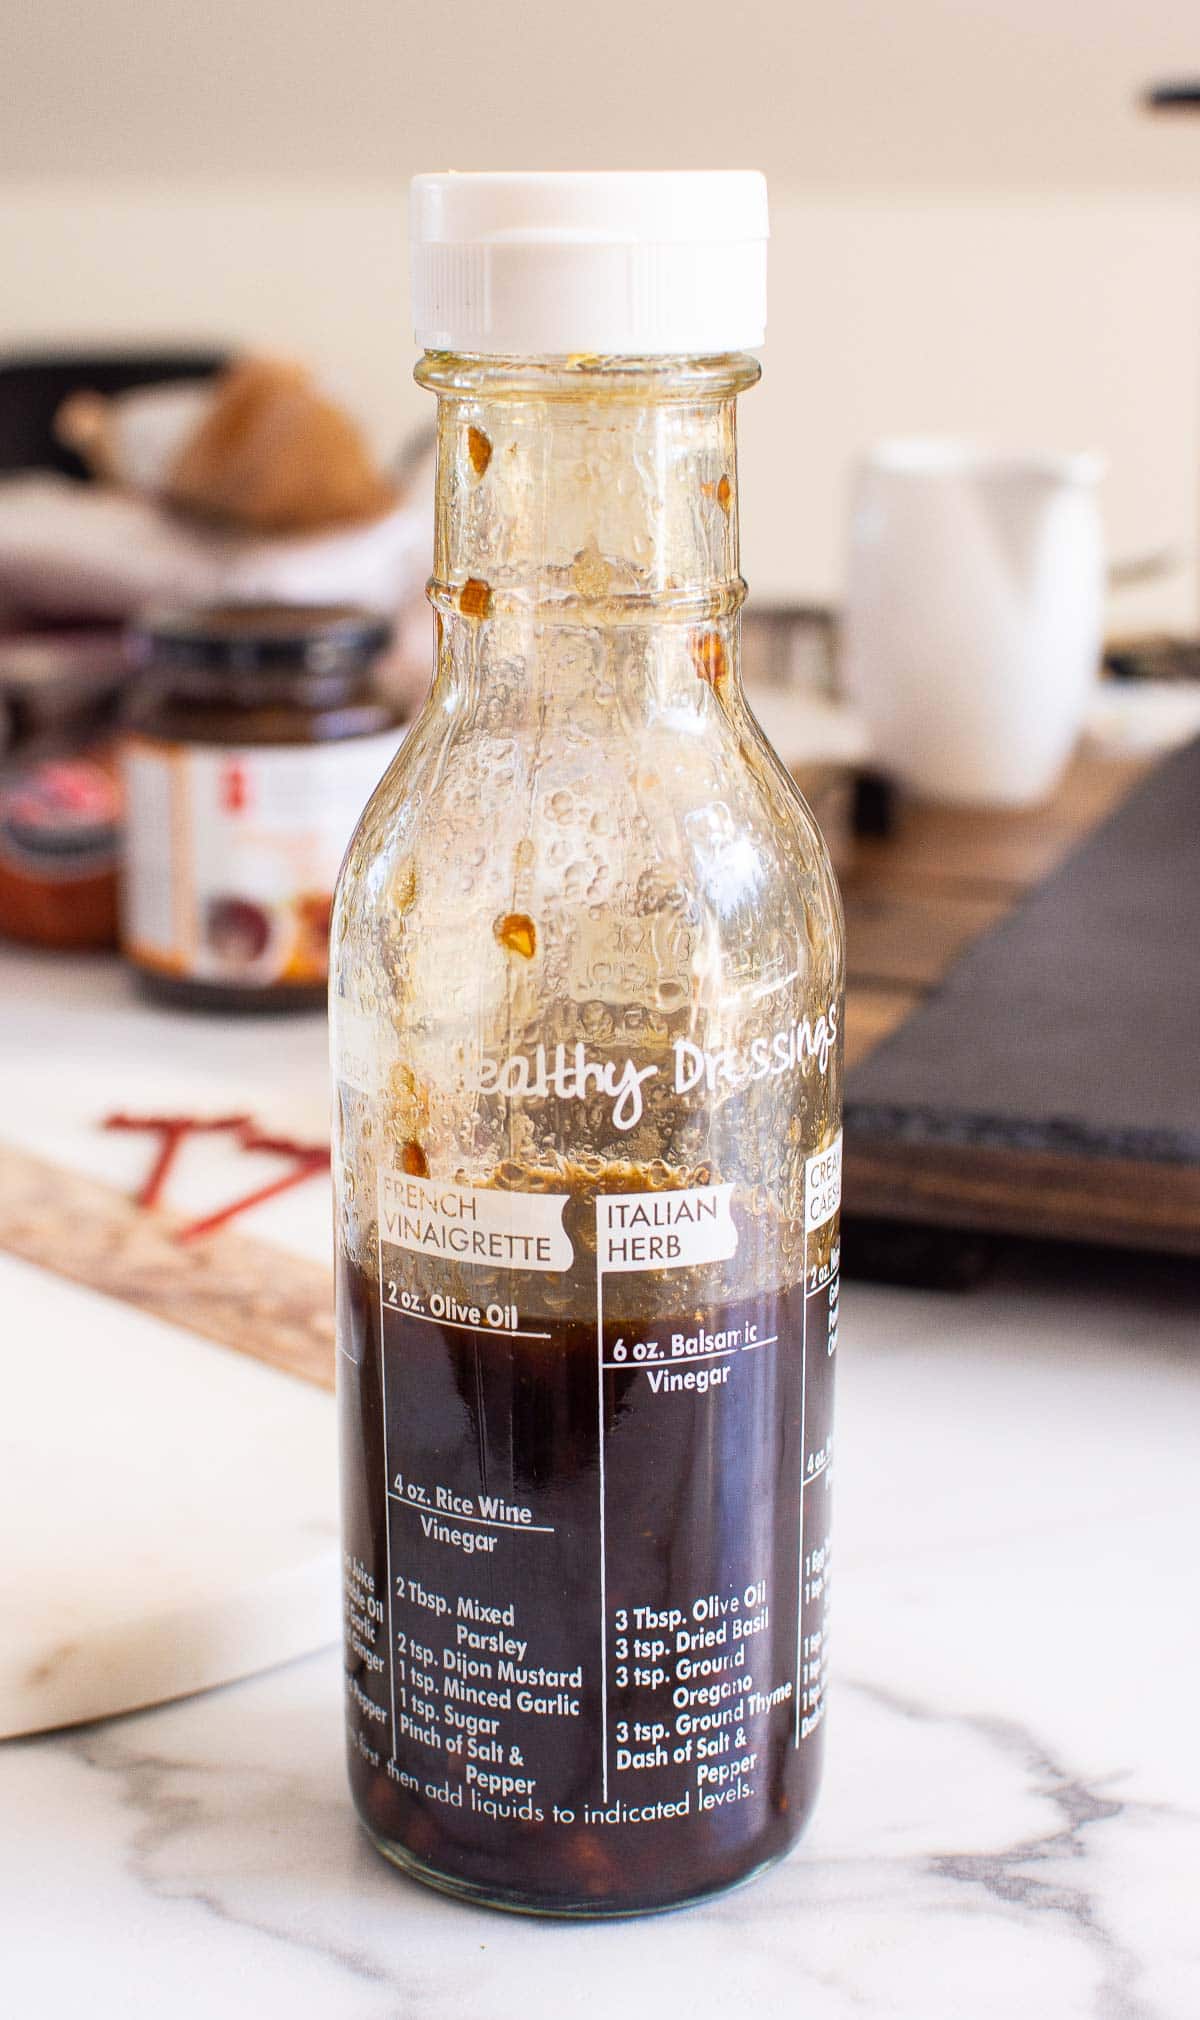 A close up of a bottle of garlic olive oil dip with balsamic vinegar.